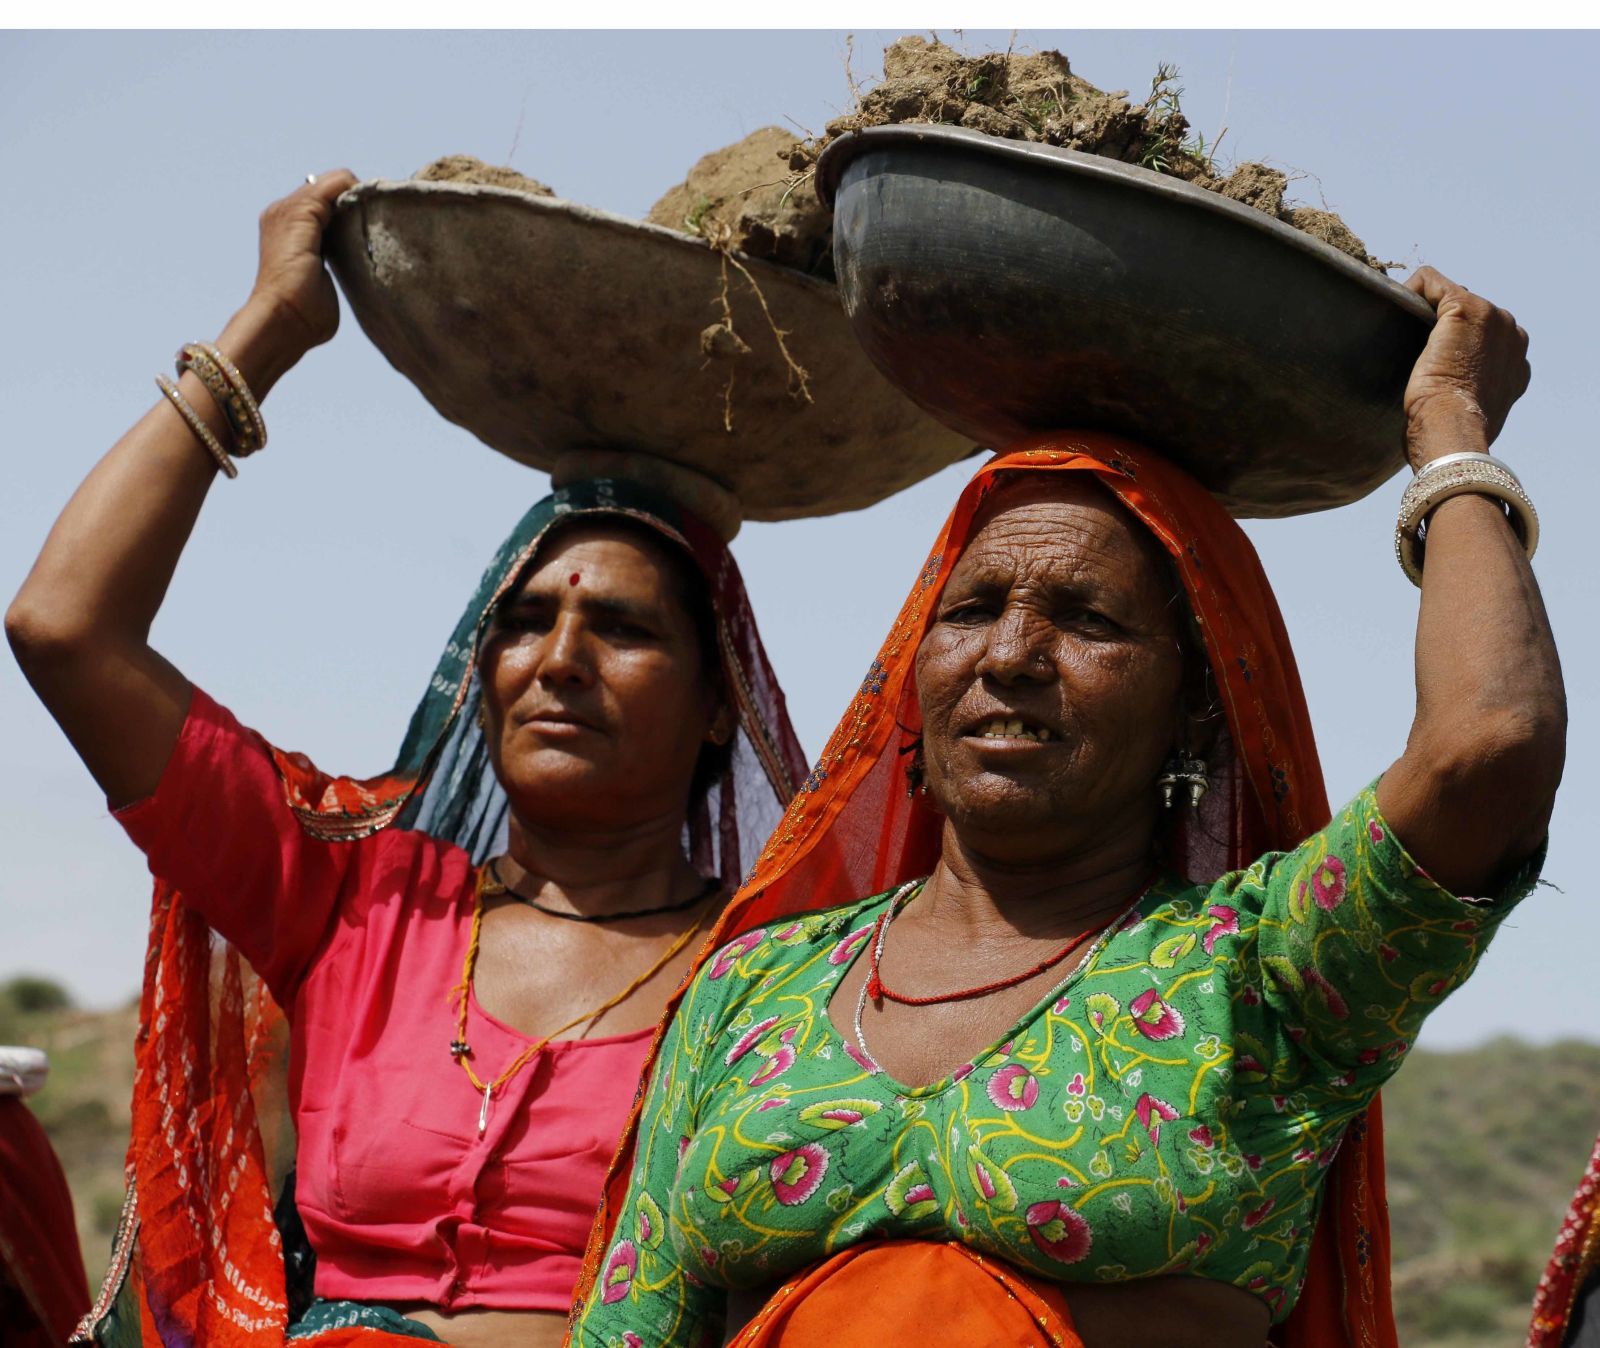 India’s Mahatma Gandhi National Rural Employment Guarantee targets low-income households in rural areas: women working at minimum wage in Rajasthan.